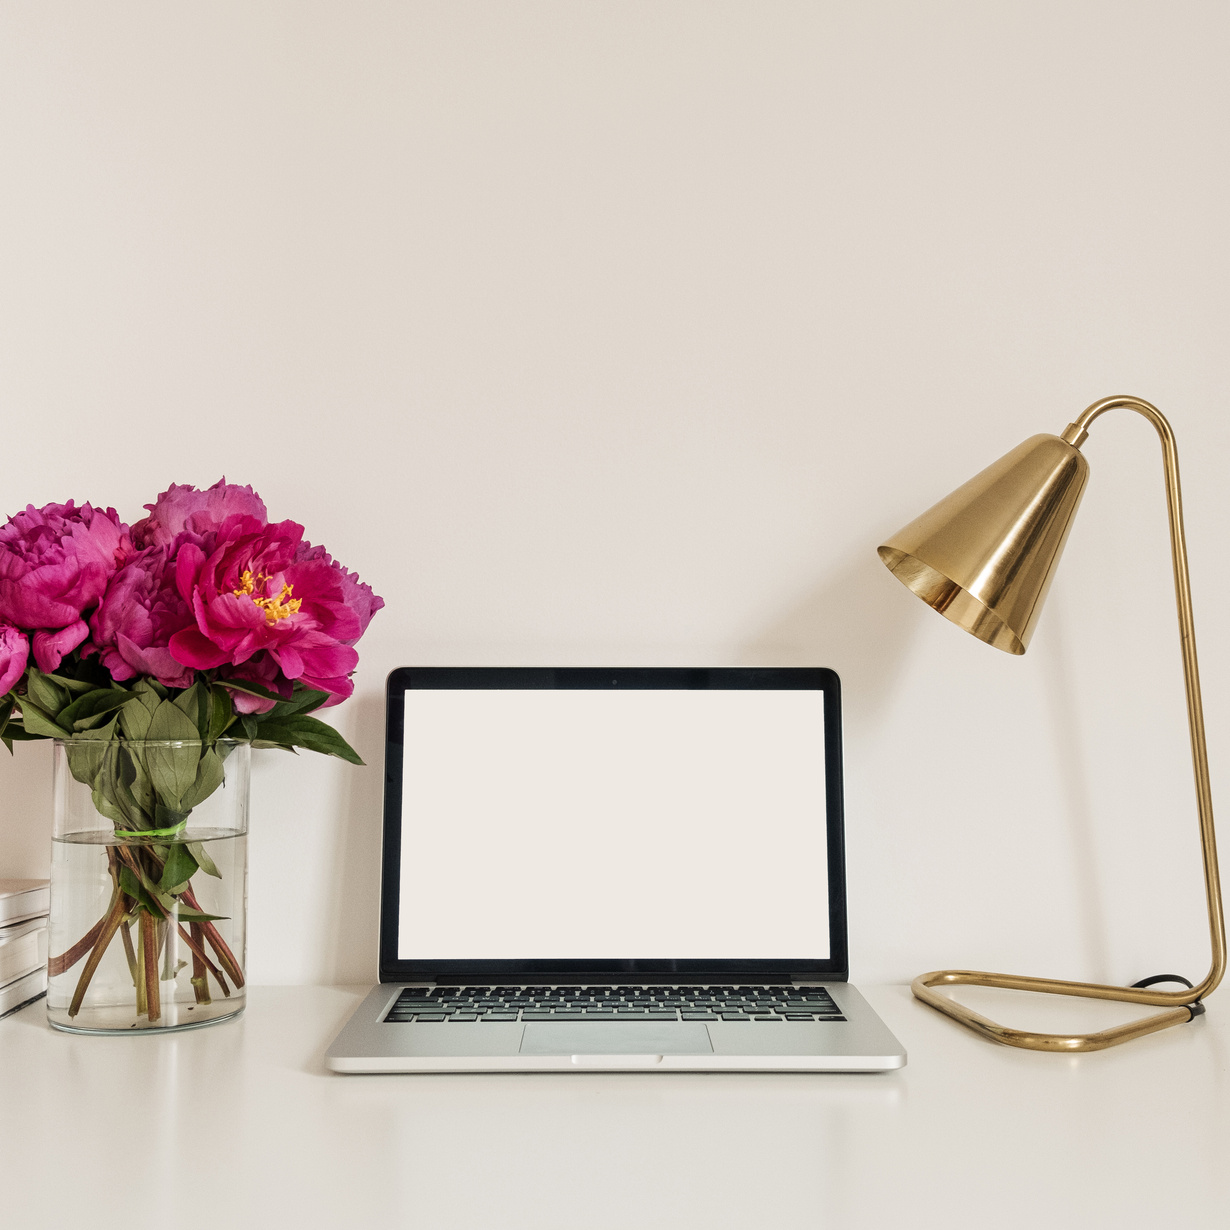 Desk with Laptop and Flowers